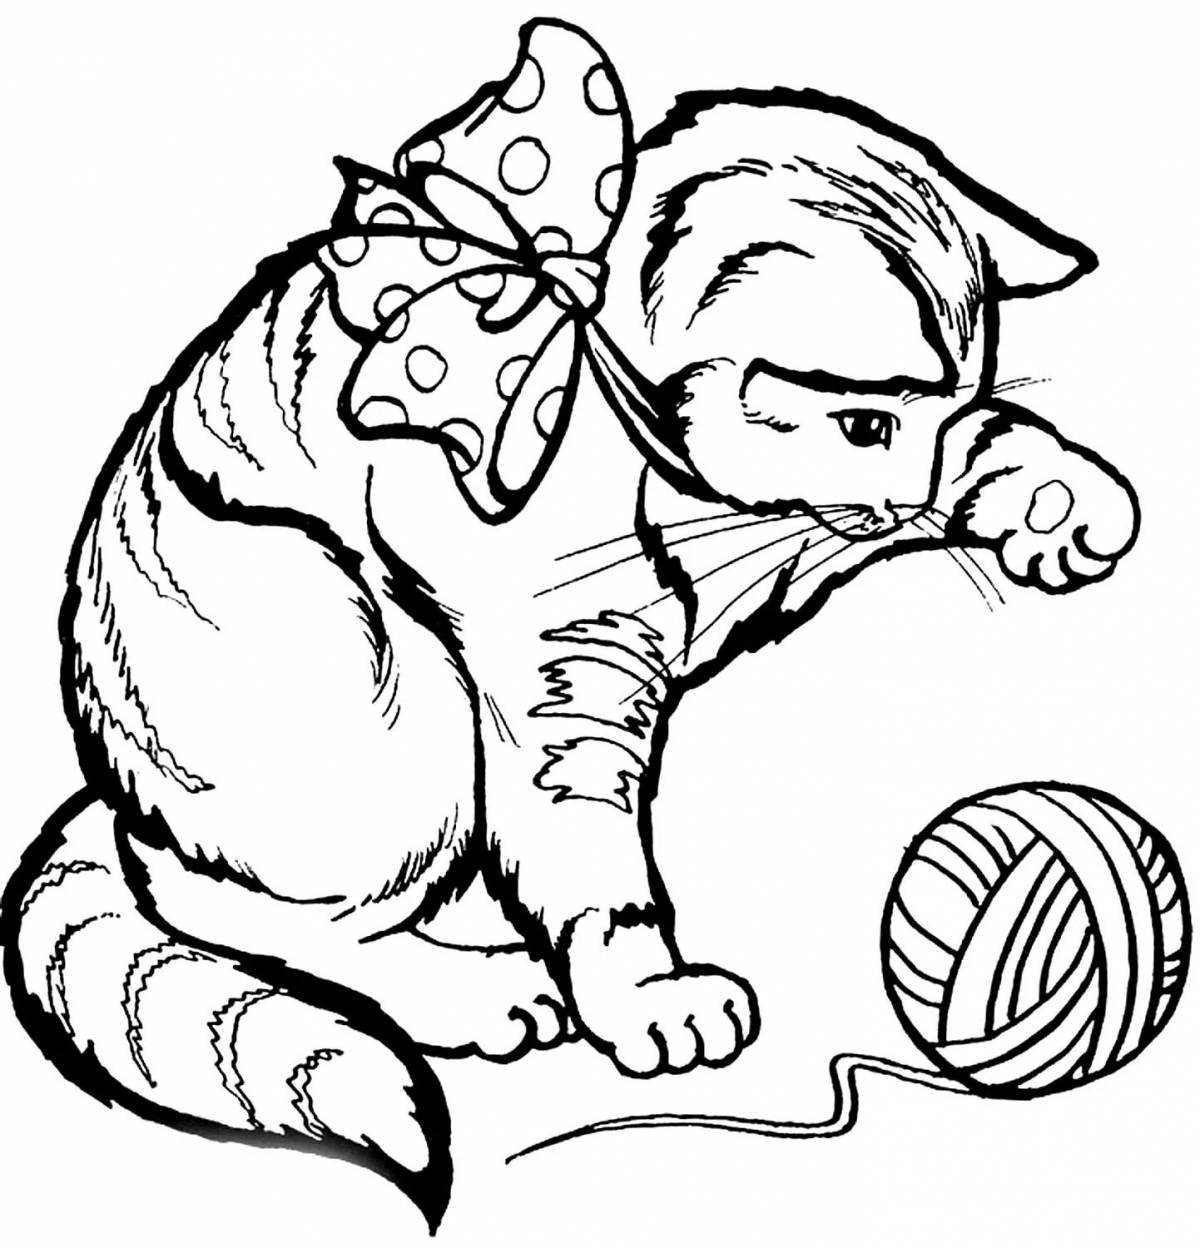 Coloring page nimble cat with a ball